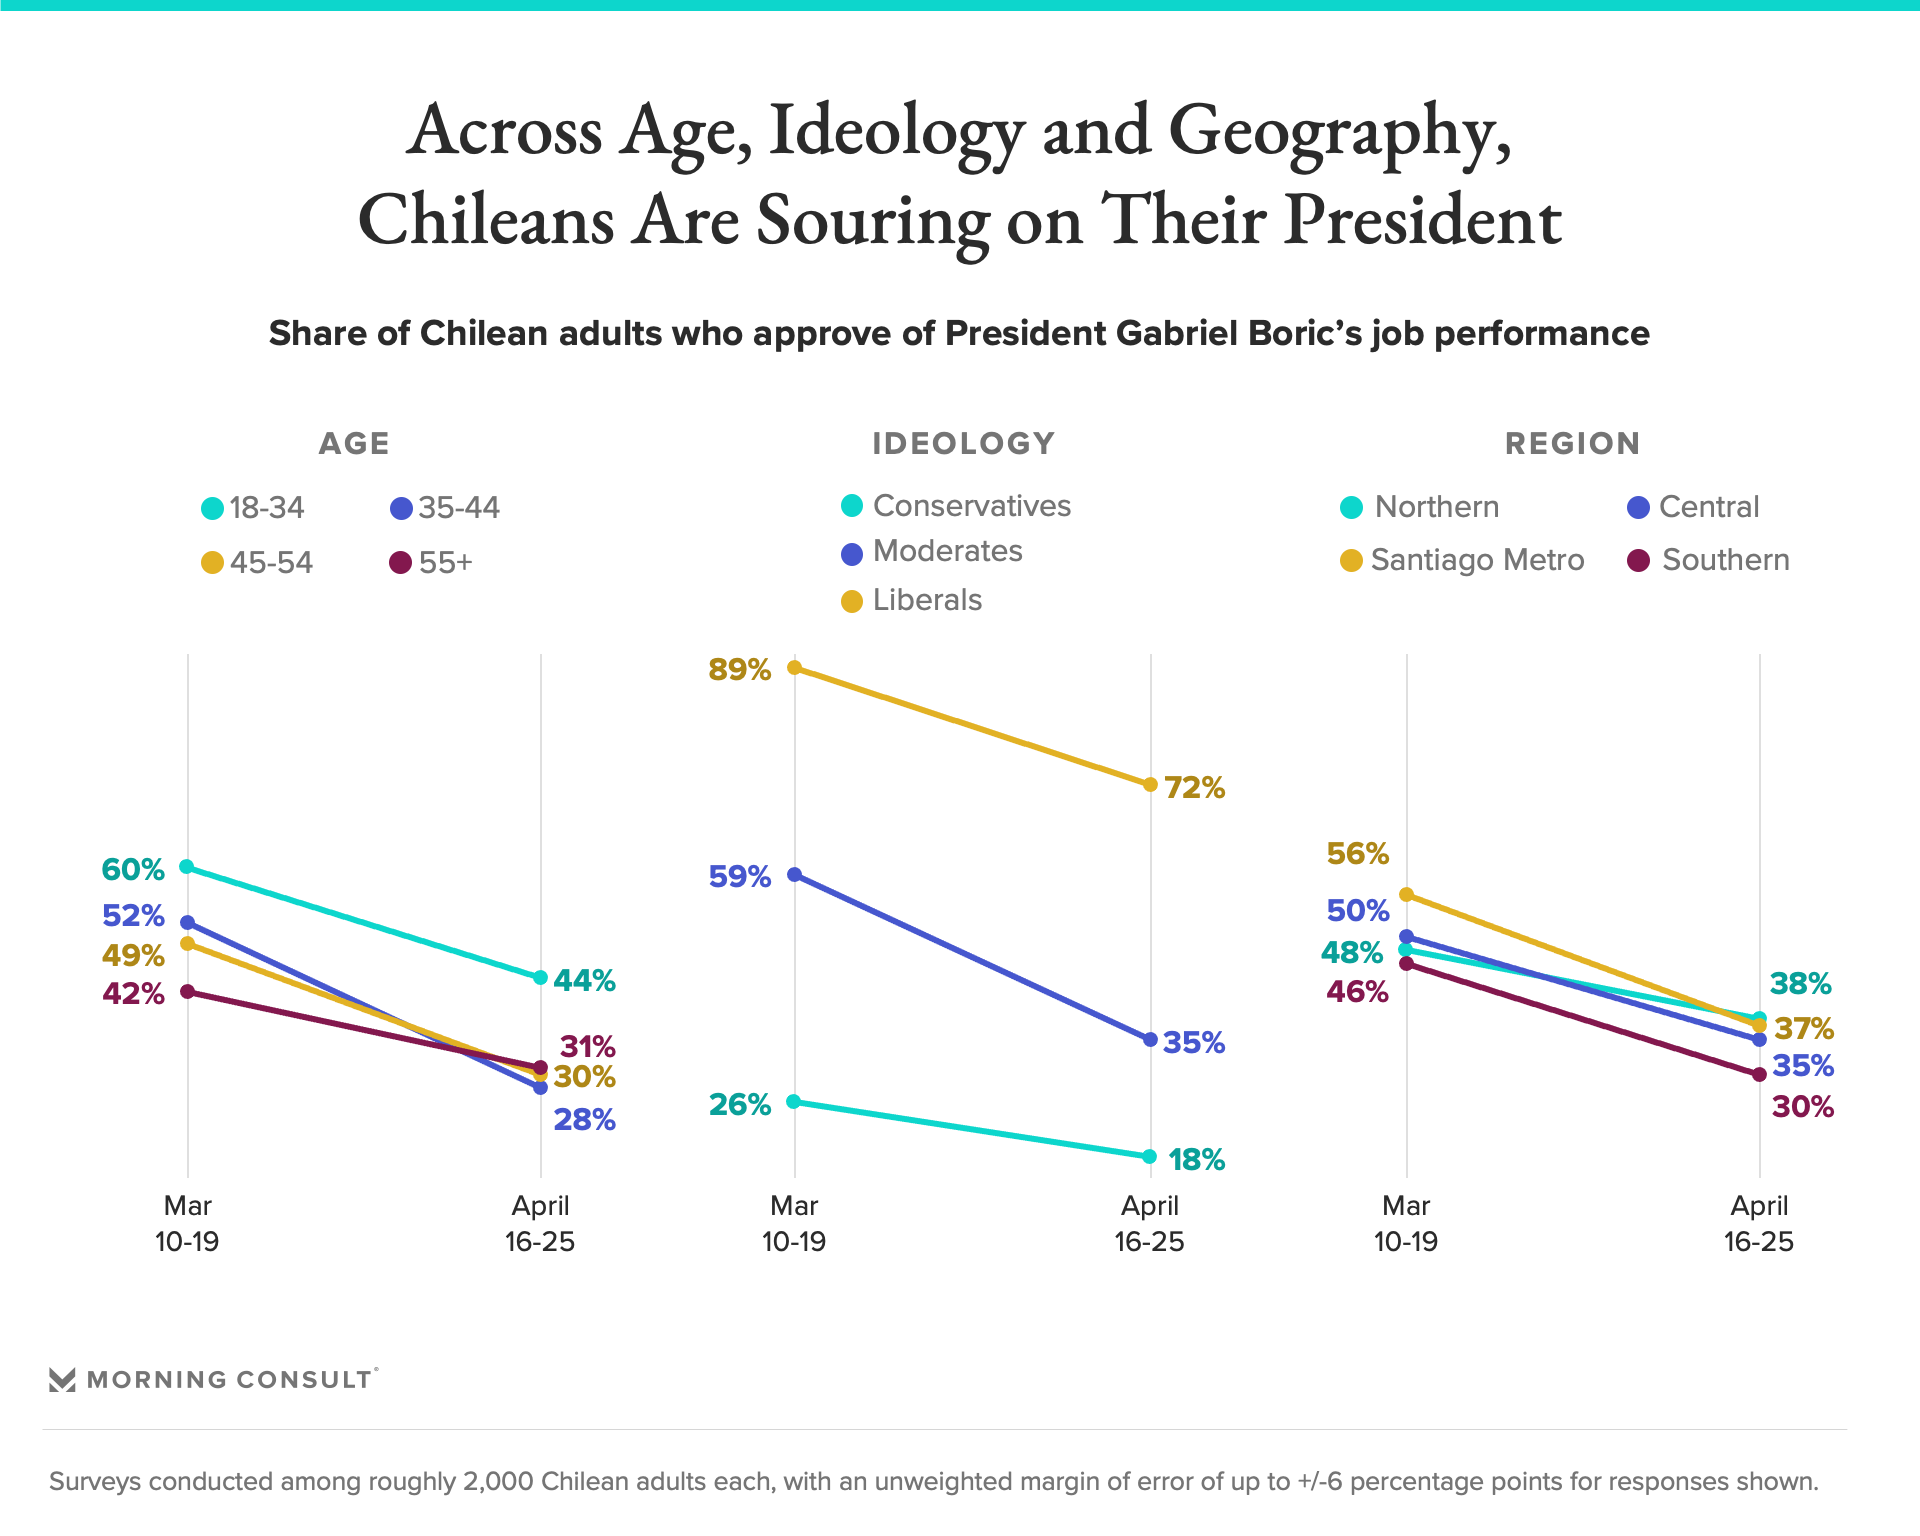 Charts depicting downward trends in Chilean approval of President Gabriel Boric by age, ideology and region in early 2022